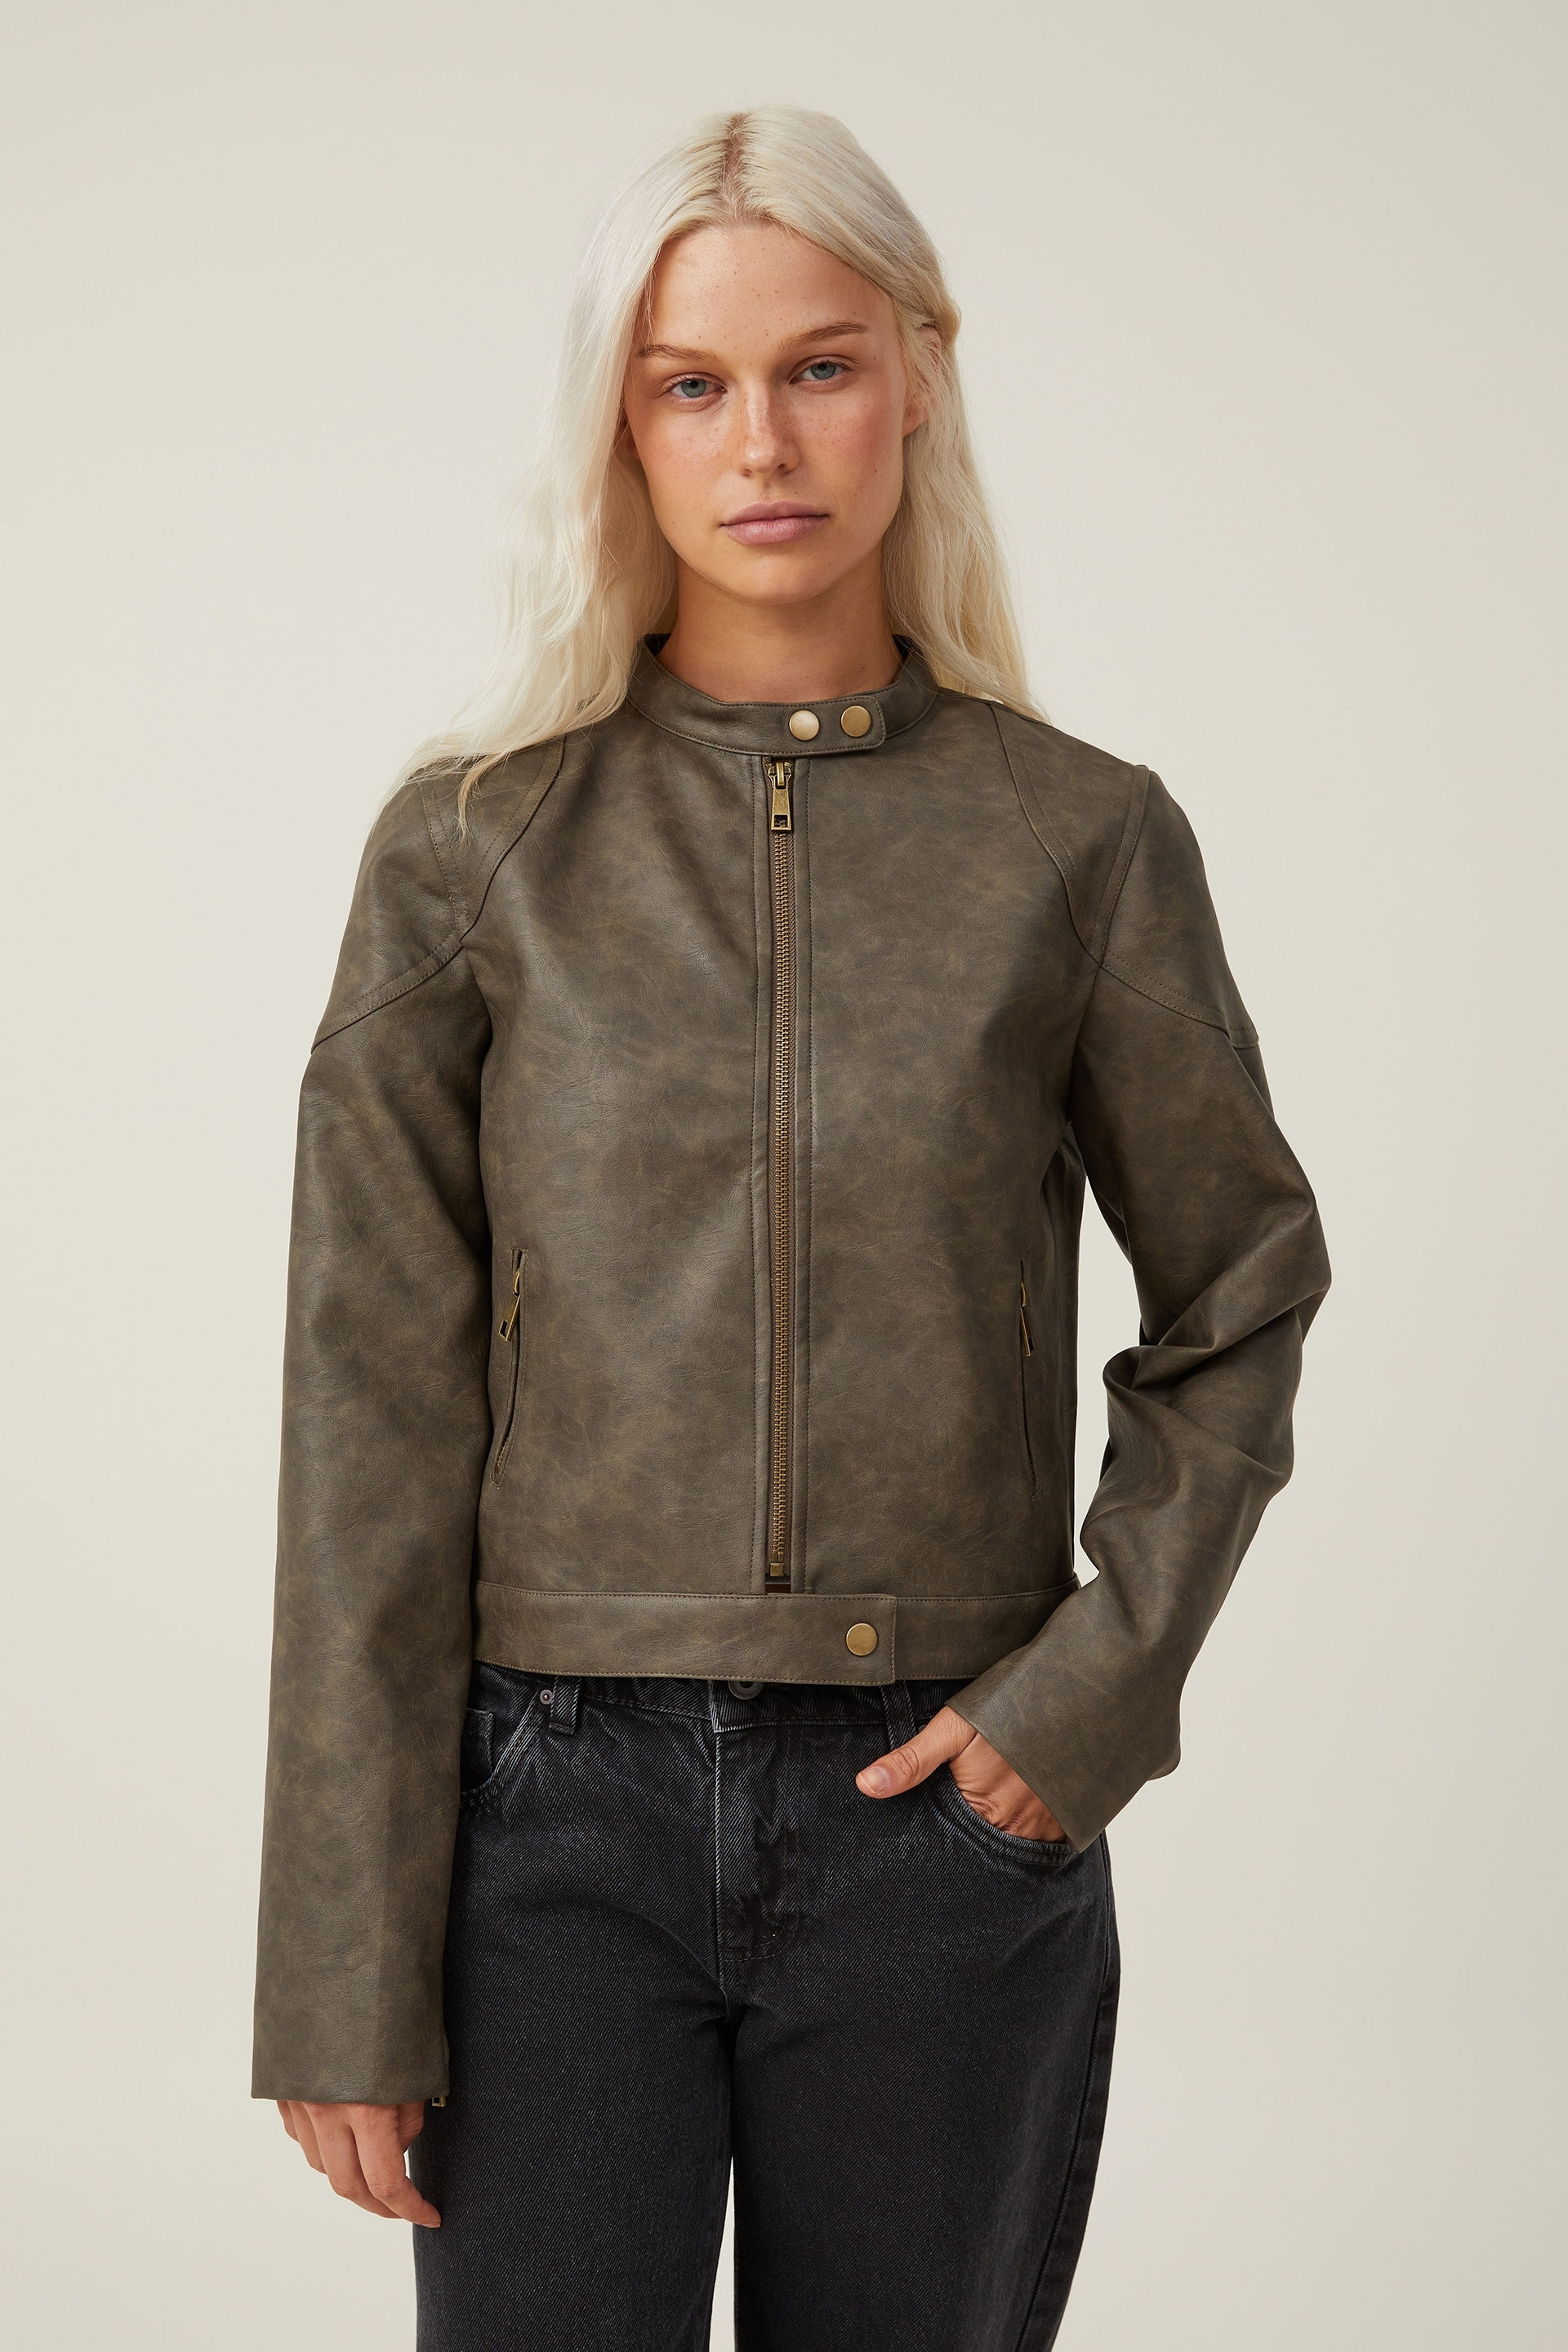 Cotton on Women - Faux Leather Bomber Jacket - Washed Brown